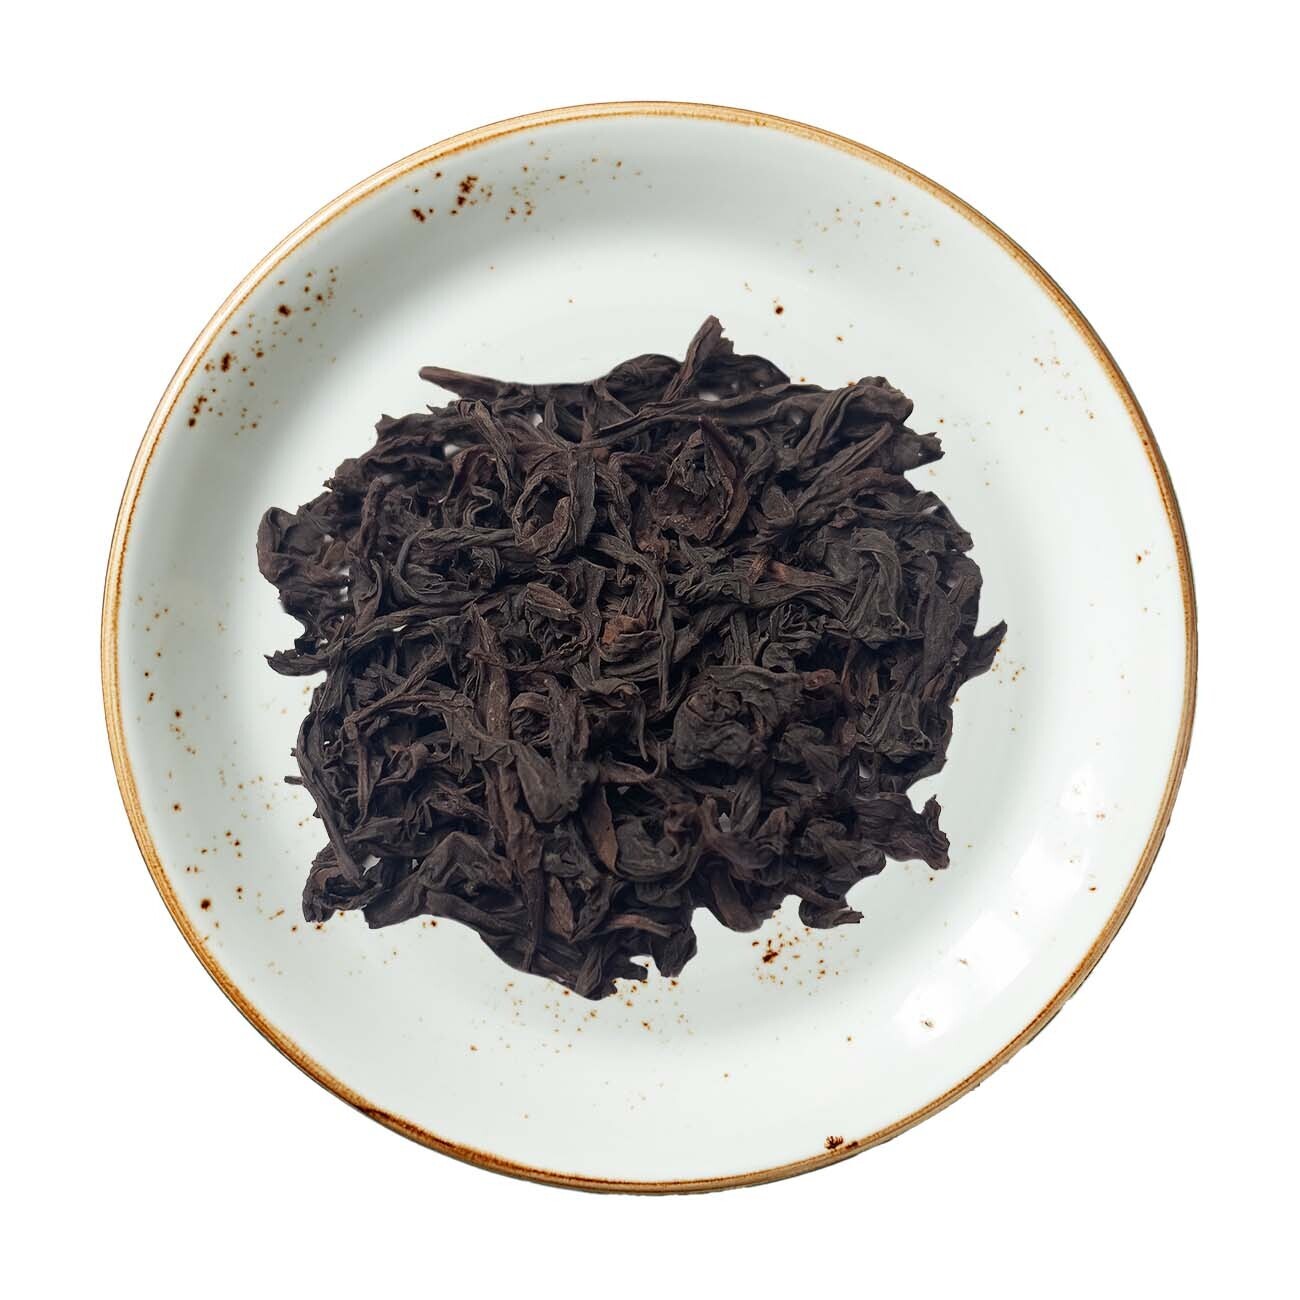 Tie Luo Han "Iron Arhat" Oolong Tea, Size: One Ounce (28 grams)